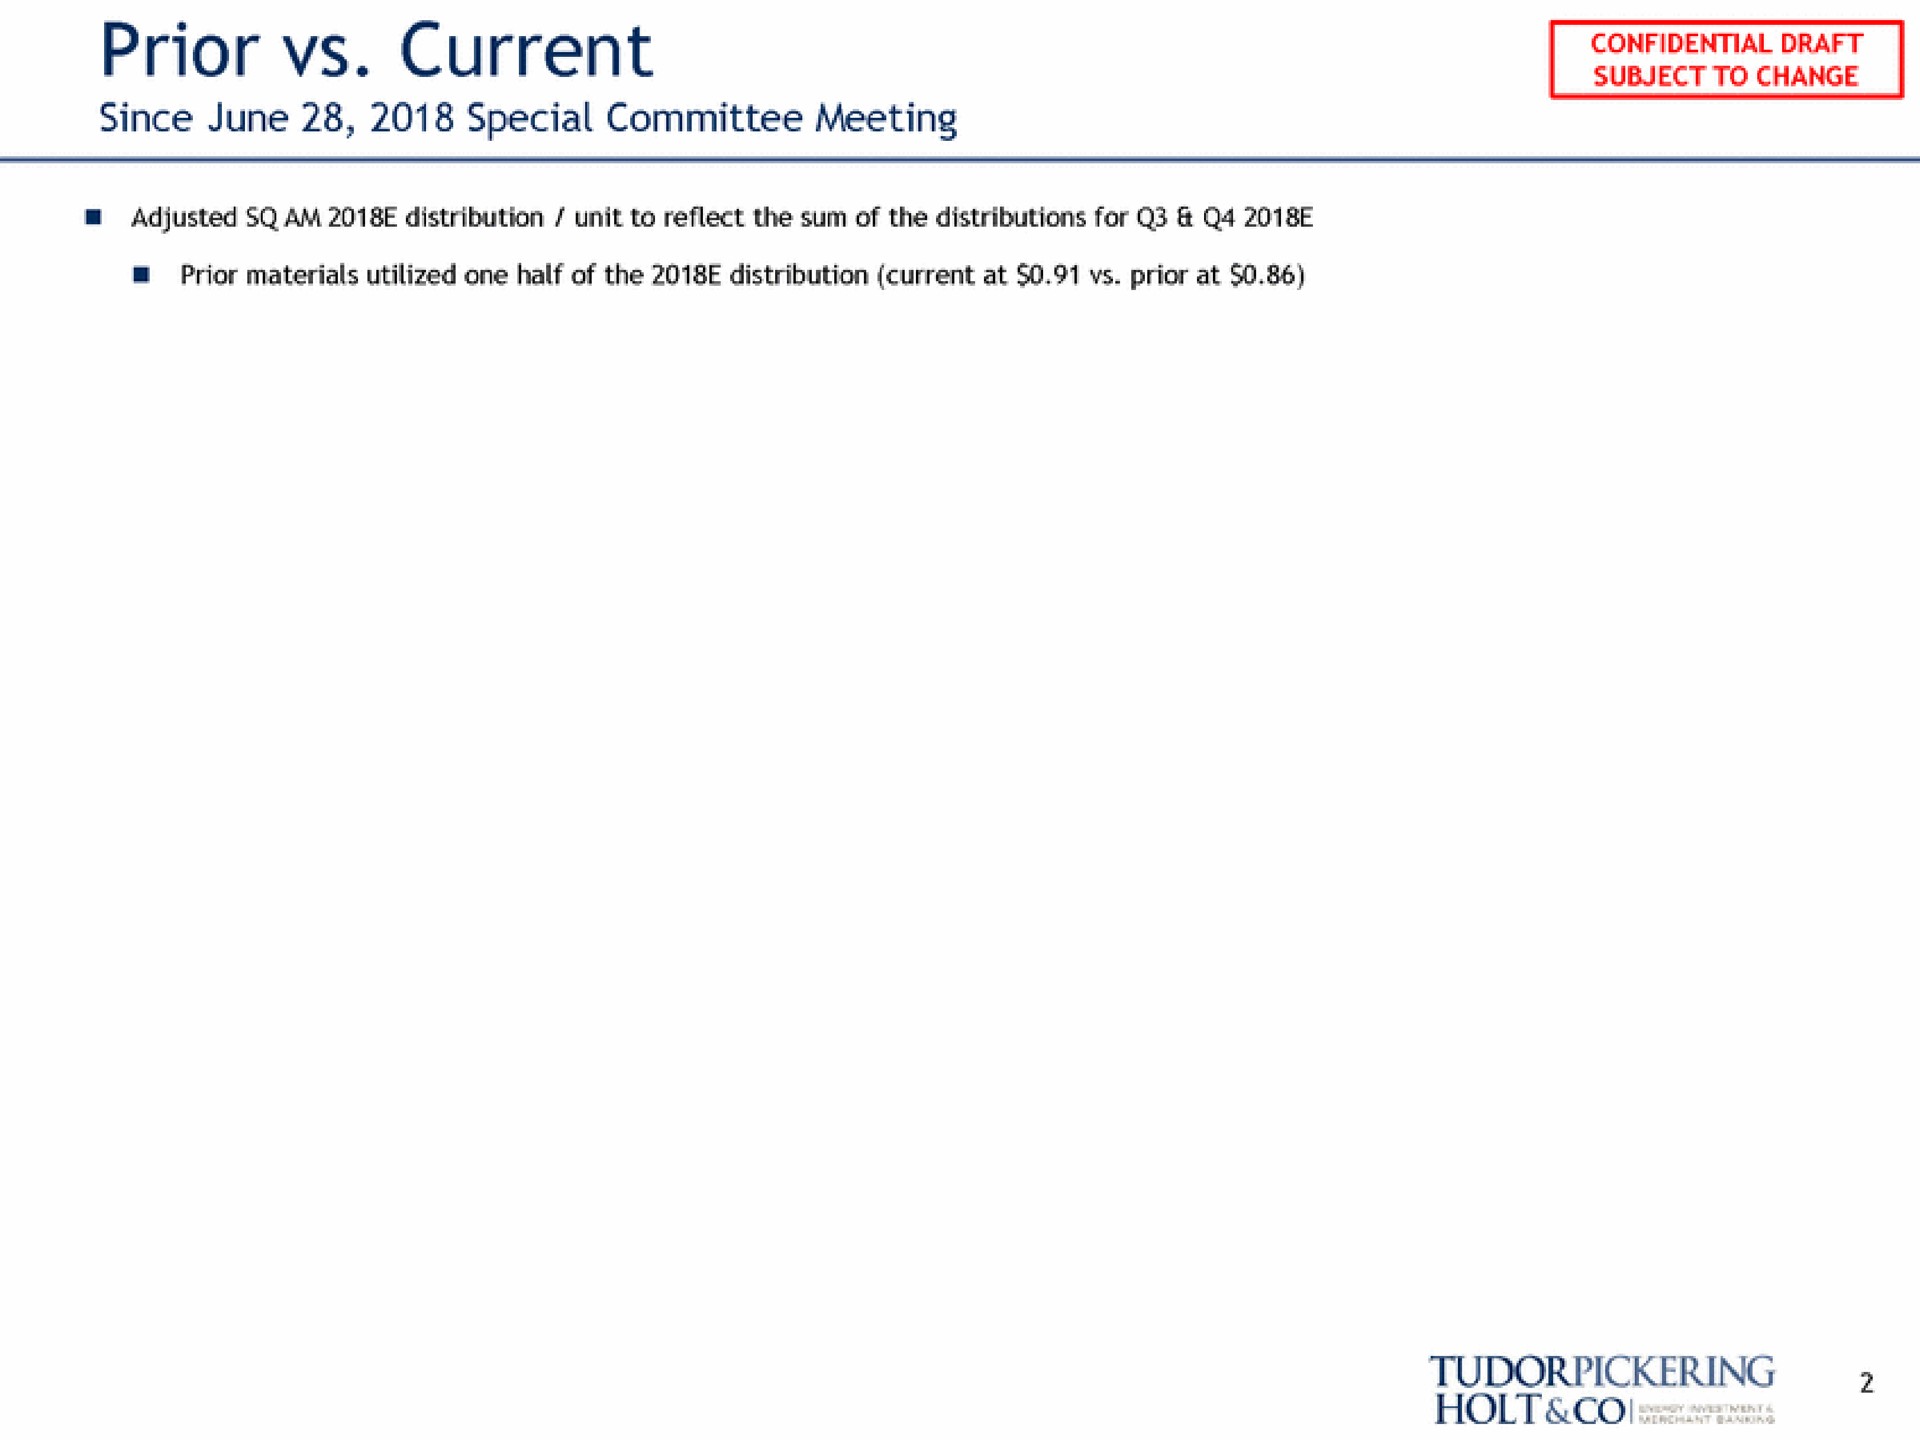 prior current since june special committee meeting | Tudor, Pickering, Holt & Co